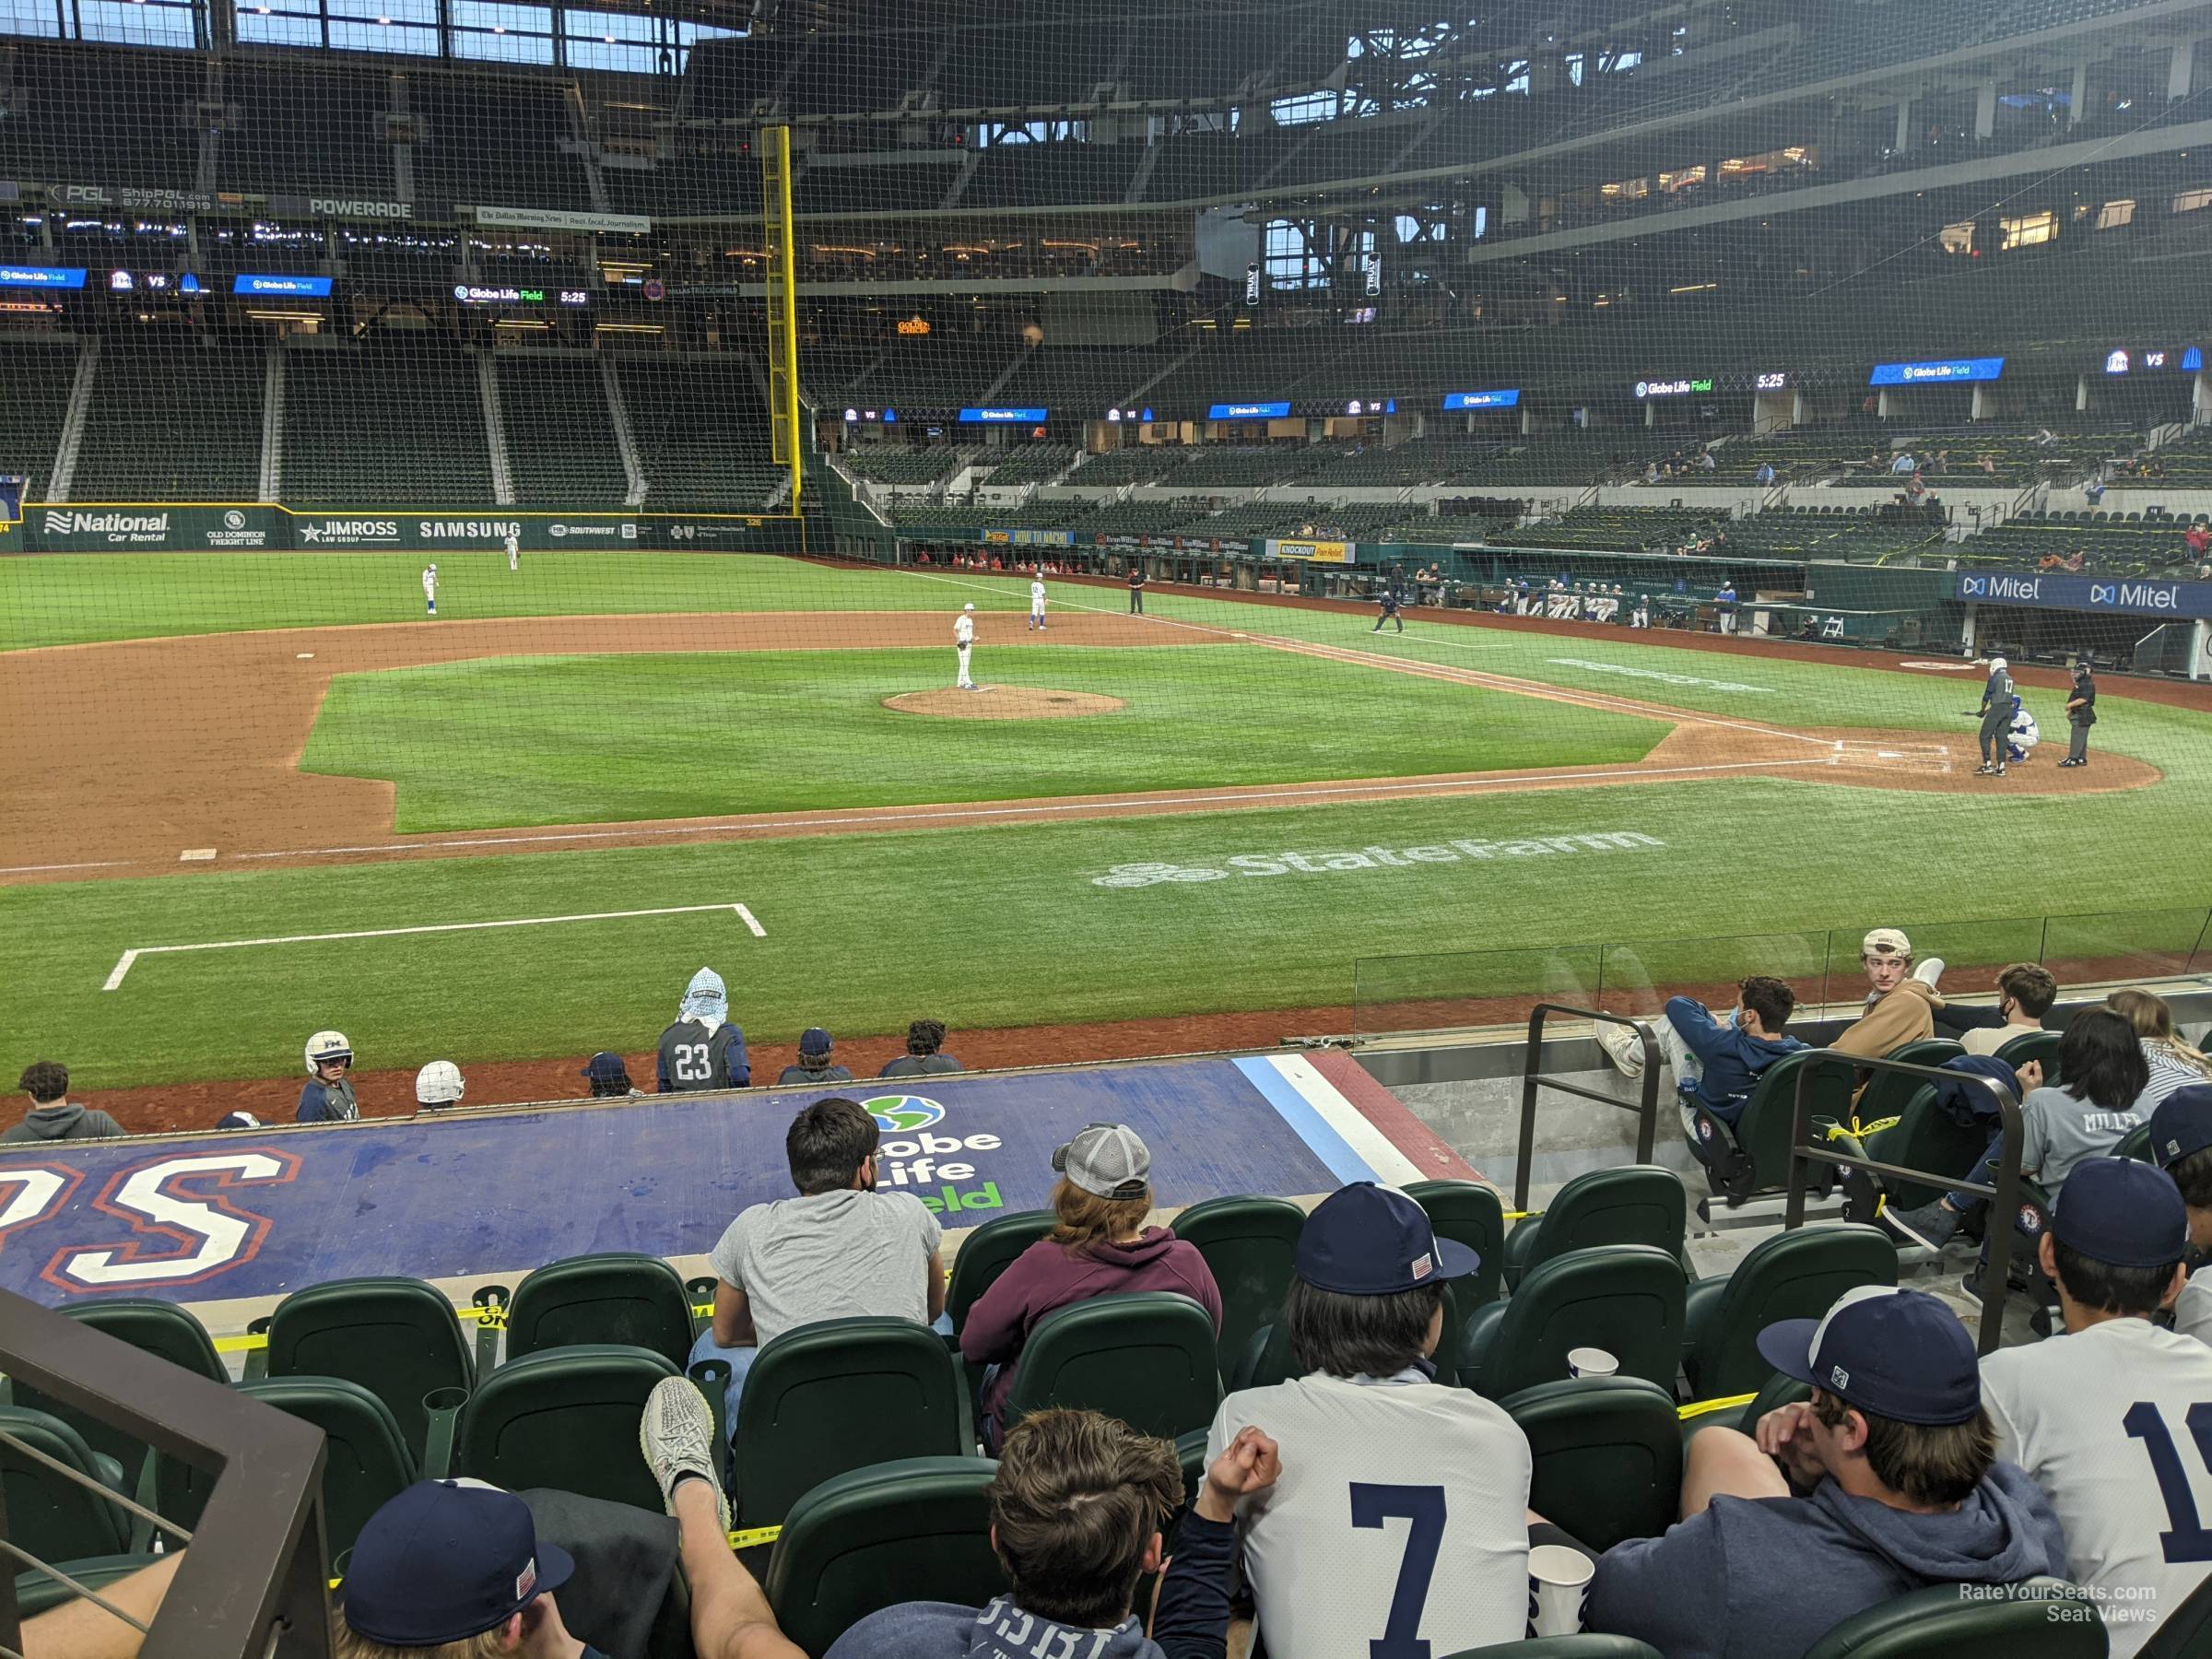 Section 8 at Globe Life Field